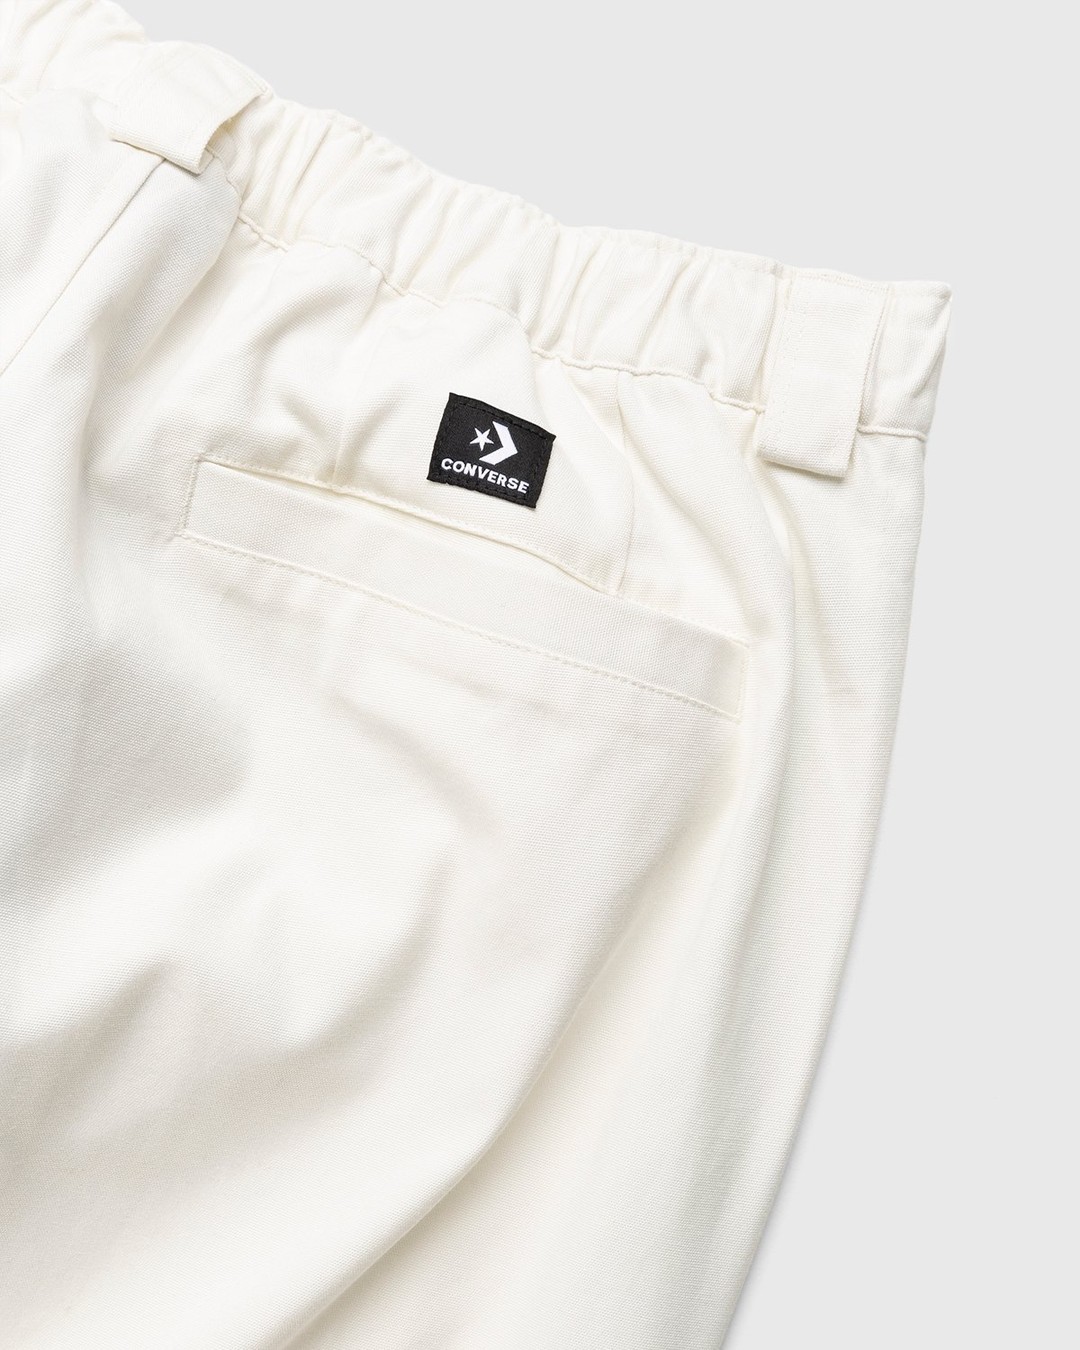 Converse – Much Love Double Pleat Chino Pant Egret - Pants - White - Image 3